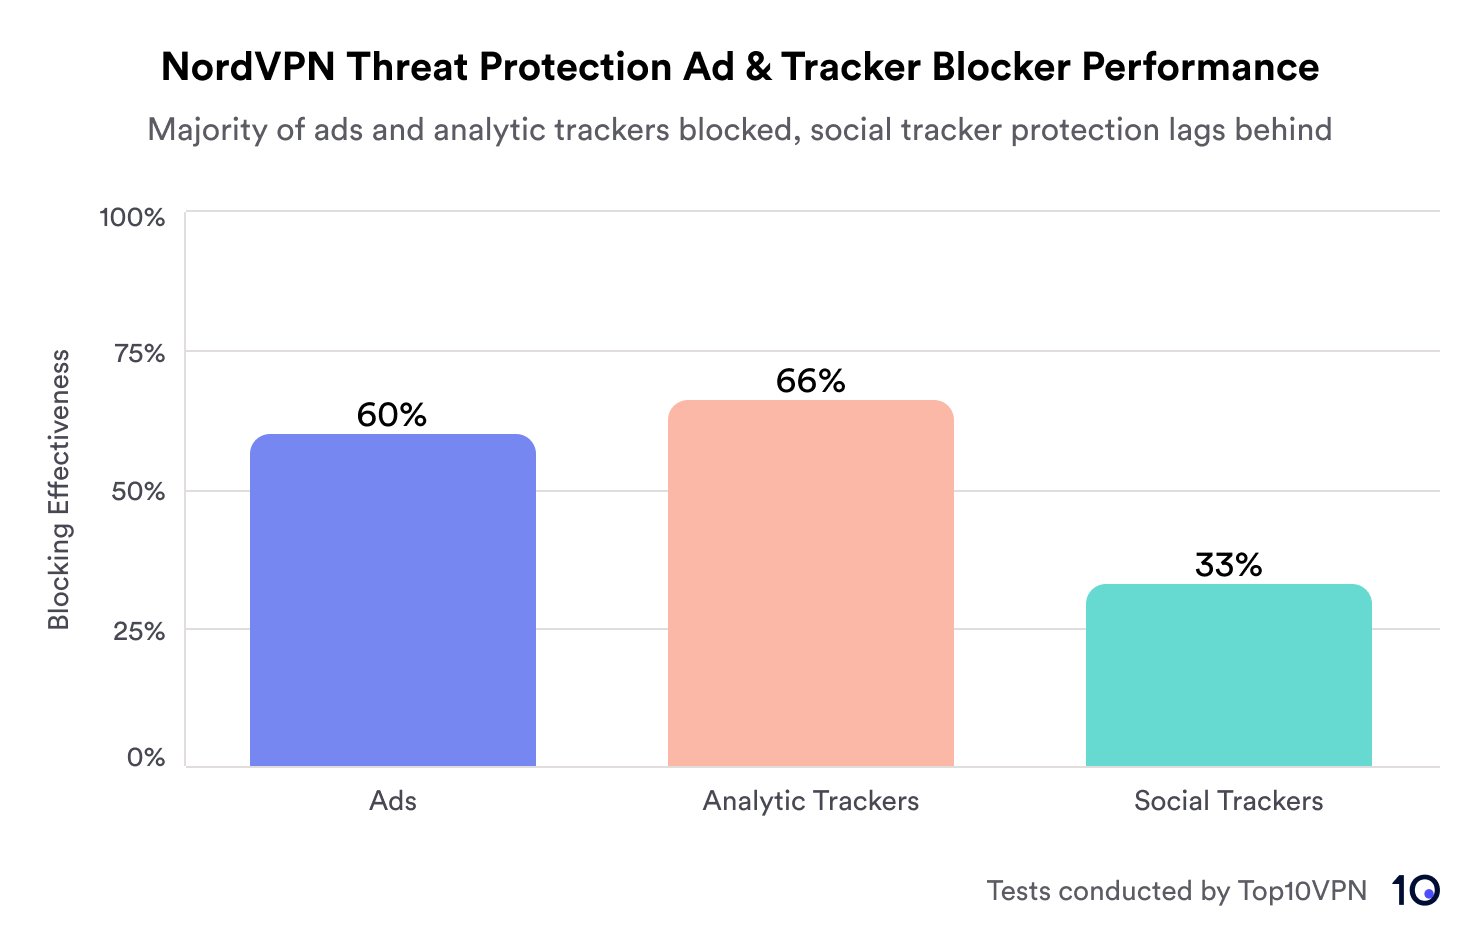 Bar chart of NordVPN Threat Protection performance showing 60% effectiveness against ads, 66% against analytic trackers, and 33% against social trackers.